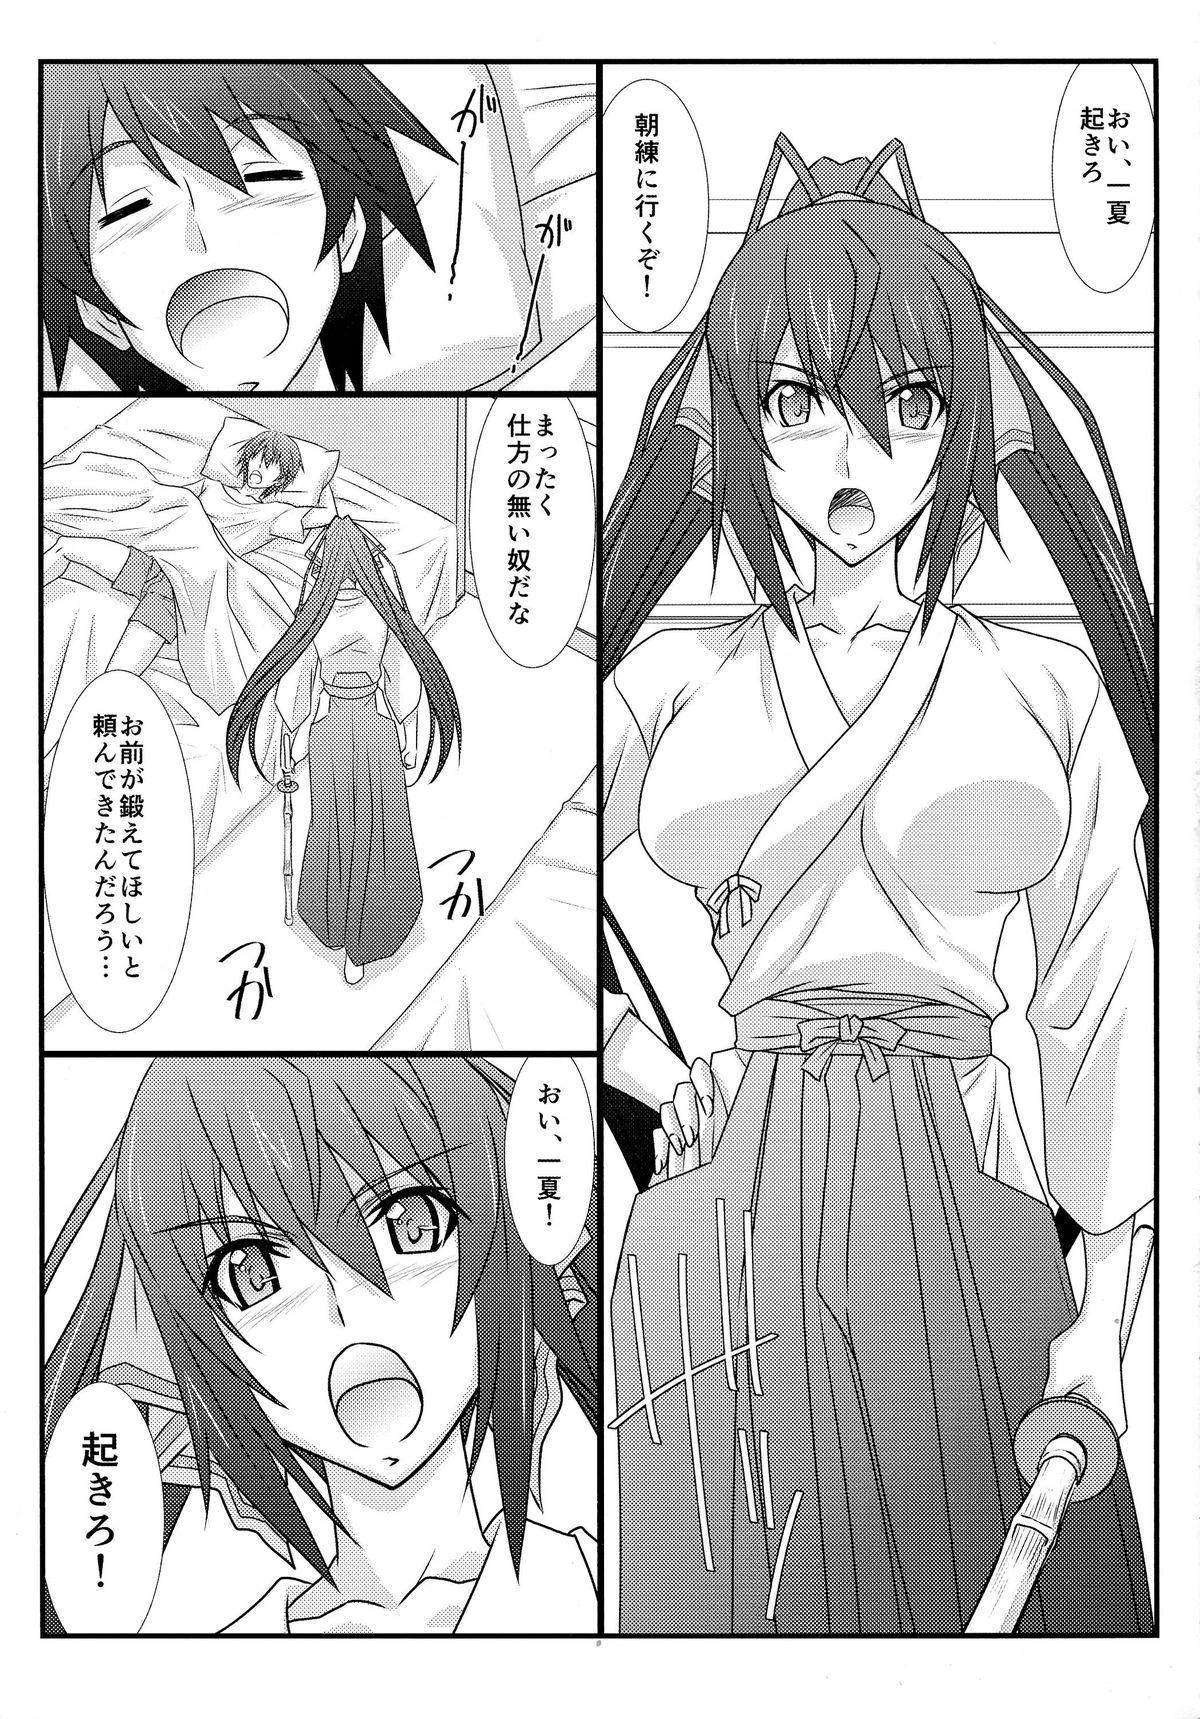 Bigblackcock Astral Bout Ver. 27 - Infinite stratos Art - Page 4